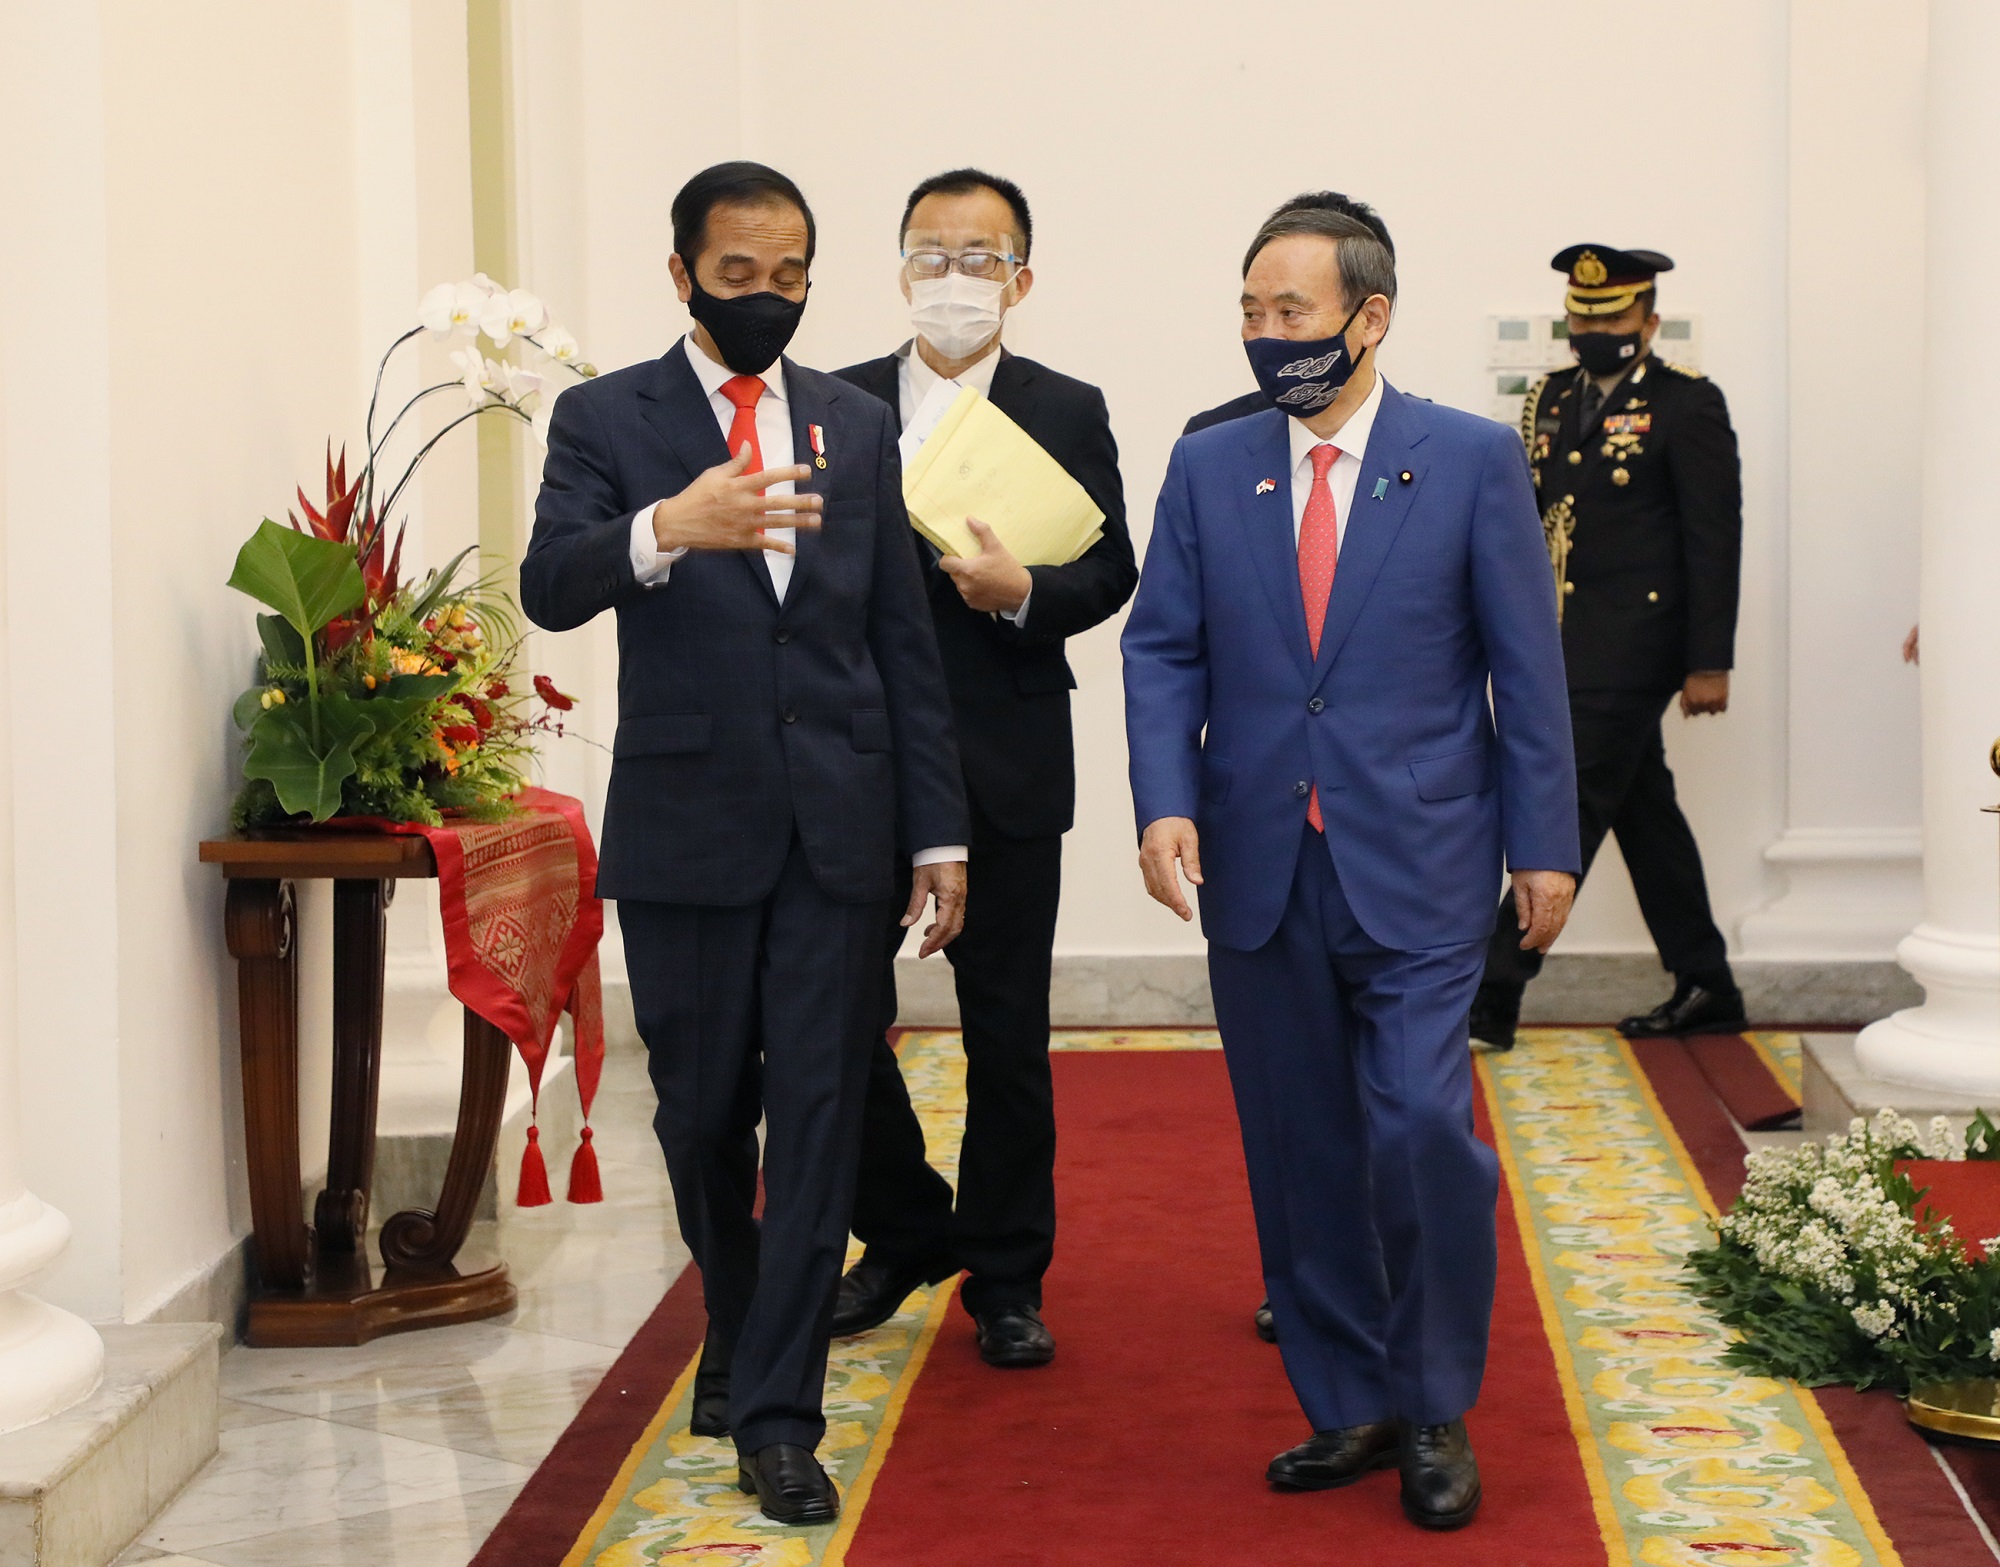 Photograph of the two leaders attending the Japan-Indonesia Summit Meeting